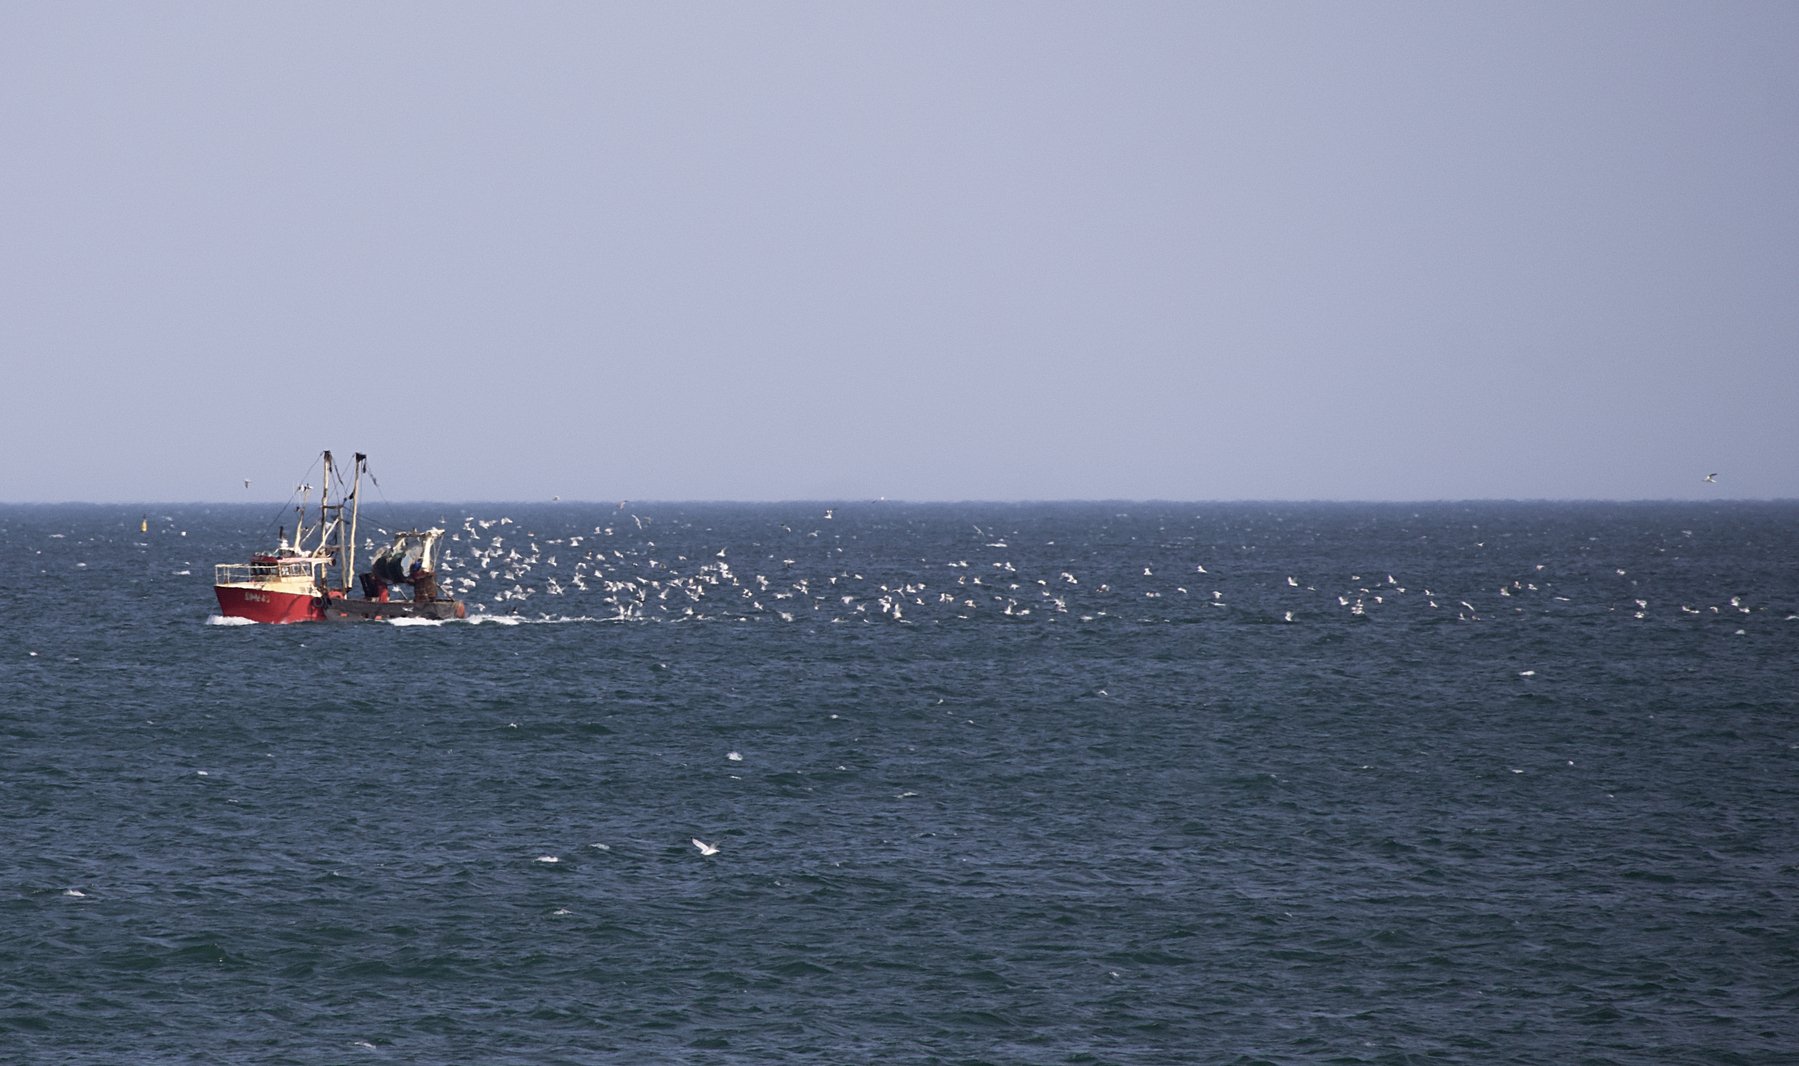 Seagulls following a fishing boat into port. 